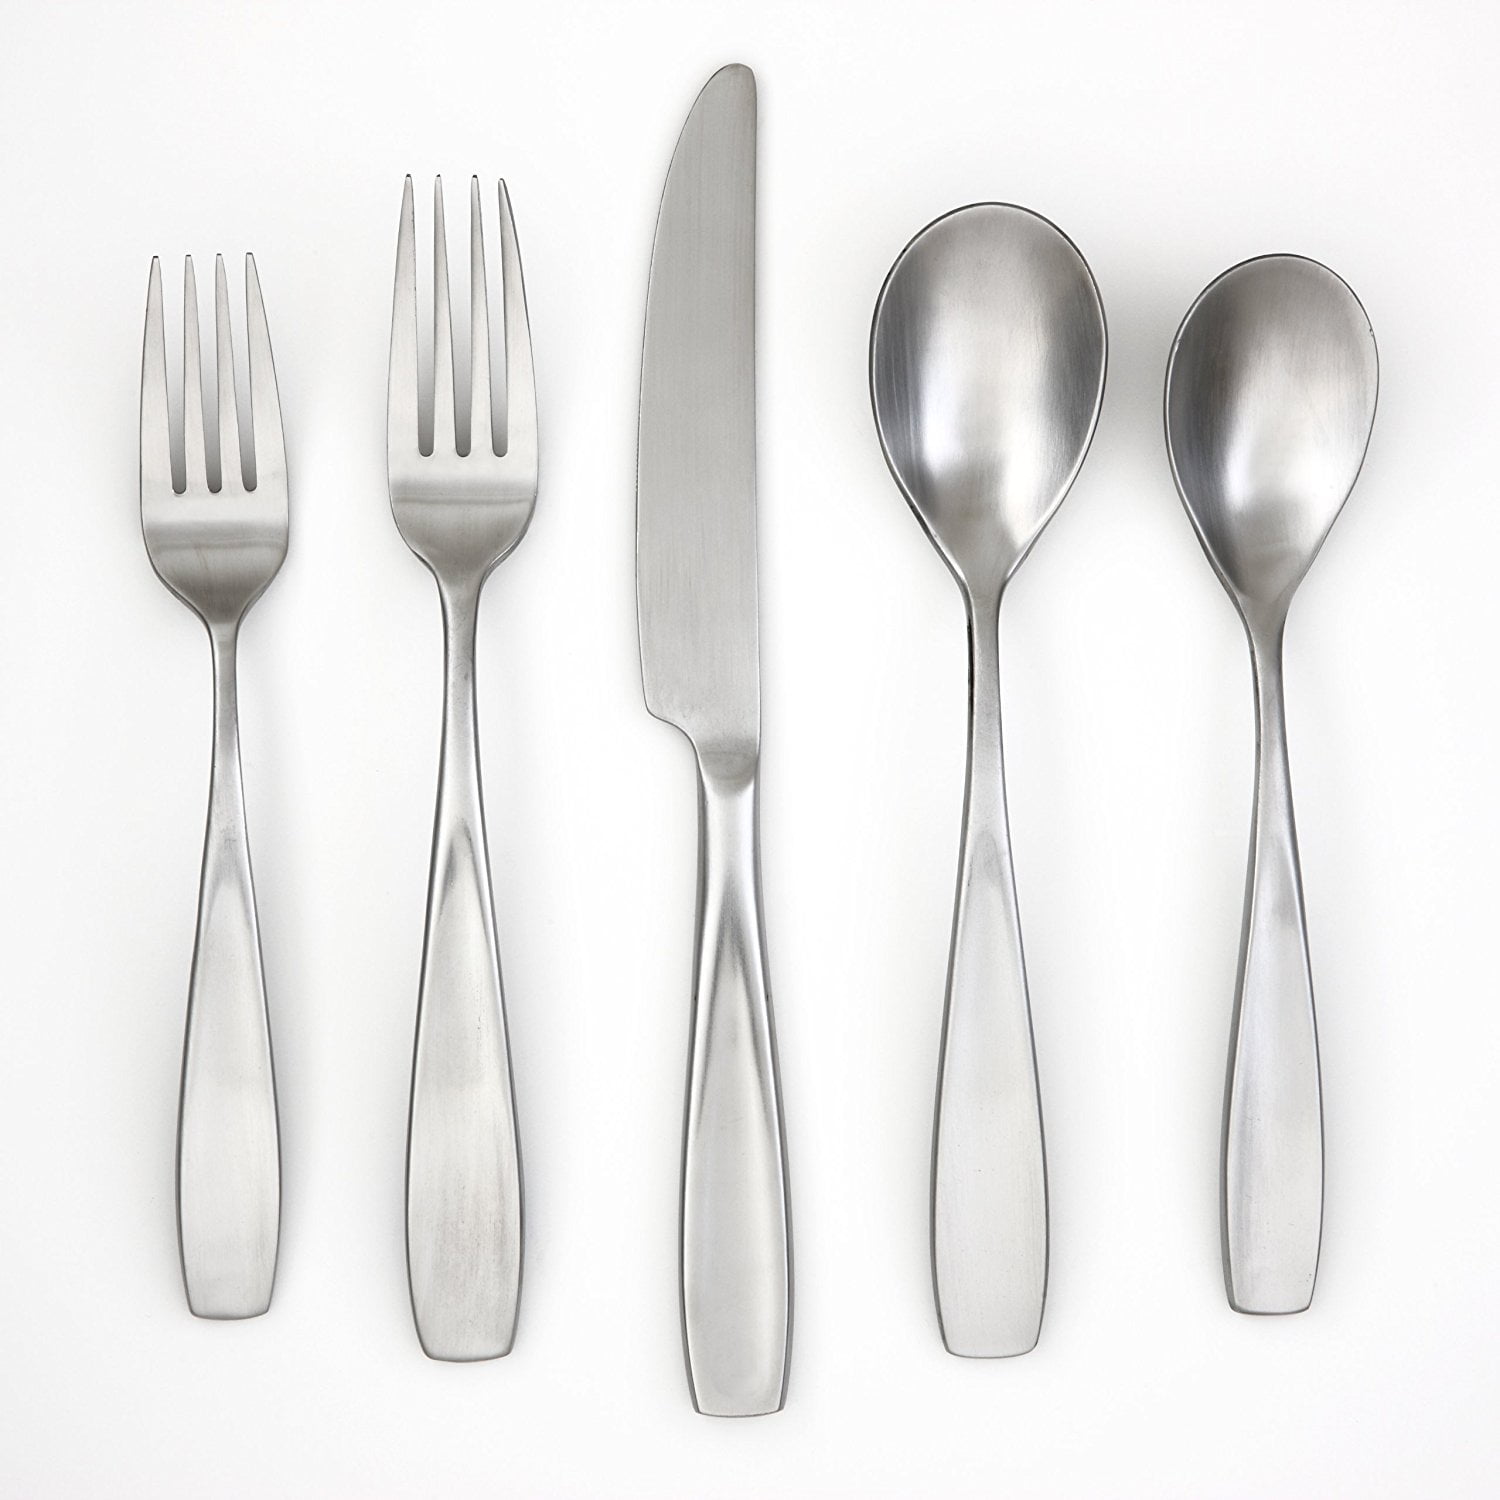 Service for 6 Cambridge Silversmiths Soiree Mirror 30-Piece Flatware Silverware Set Includes Forks/Spoons/Knives 